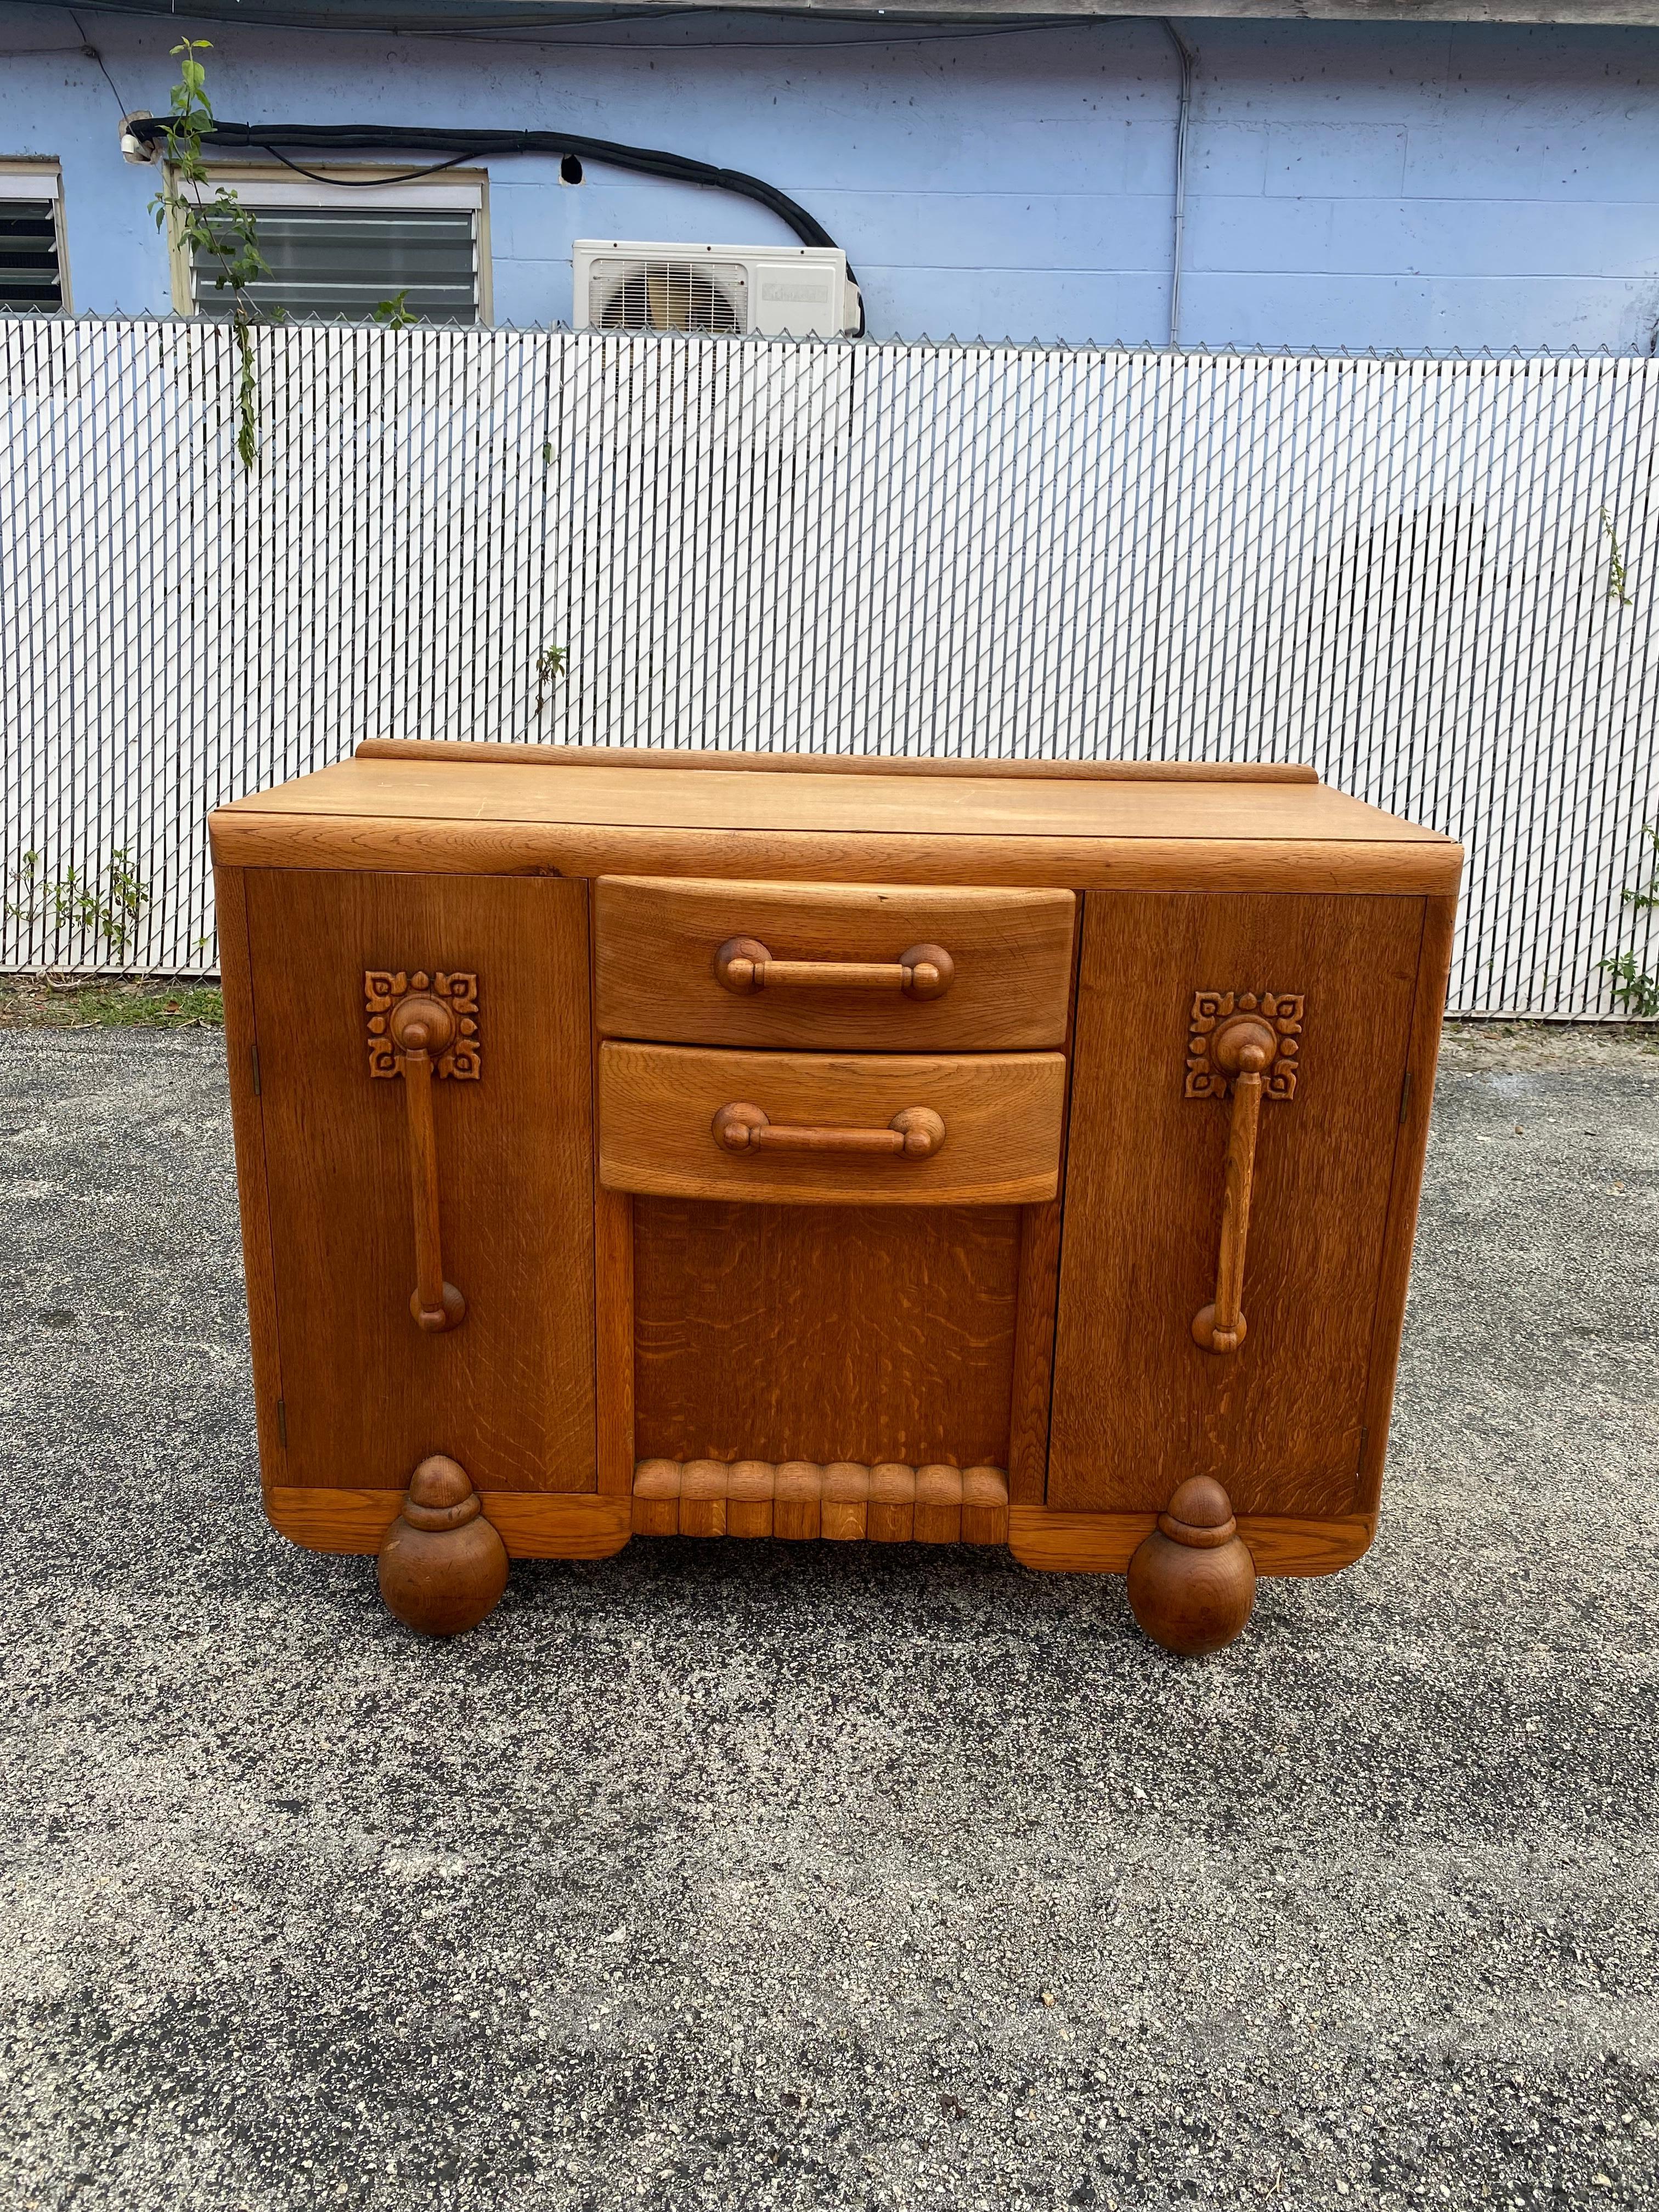 1960s Sculptural Art Deco Style Sideboard Entertainment Cabinet In Good Condition For Sale In Fort Lauderdale, FL